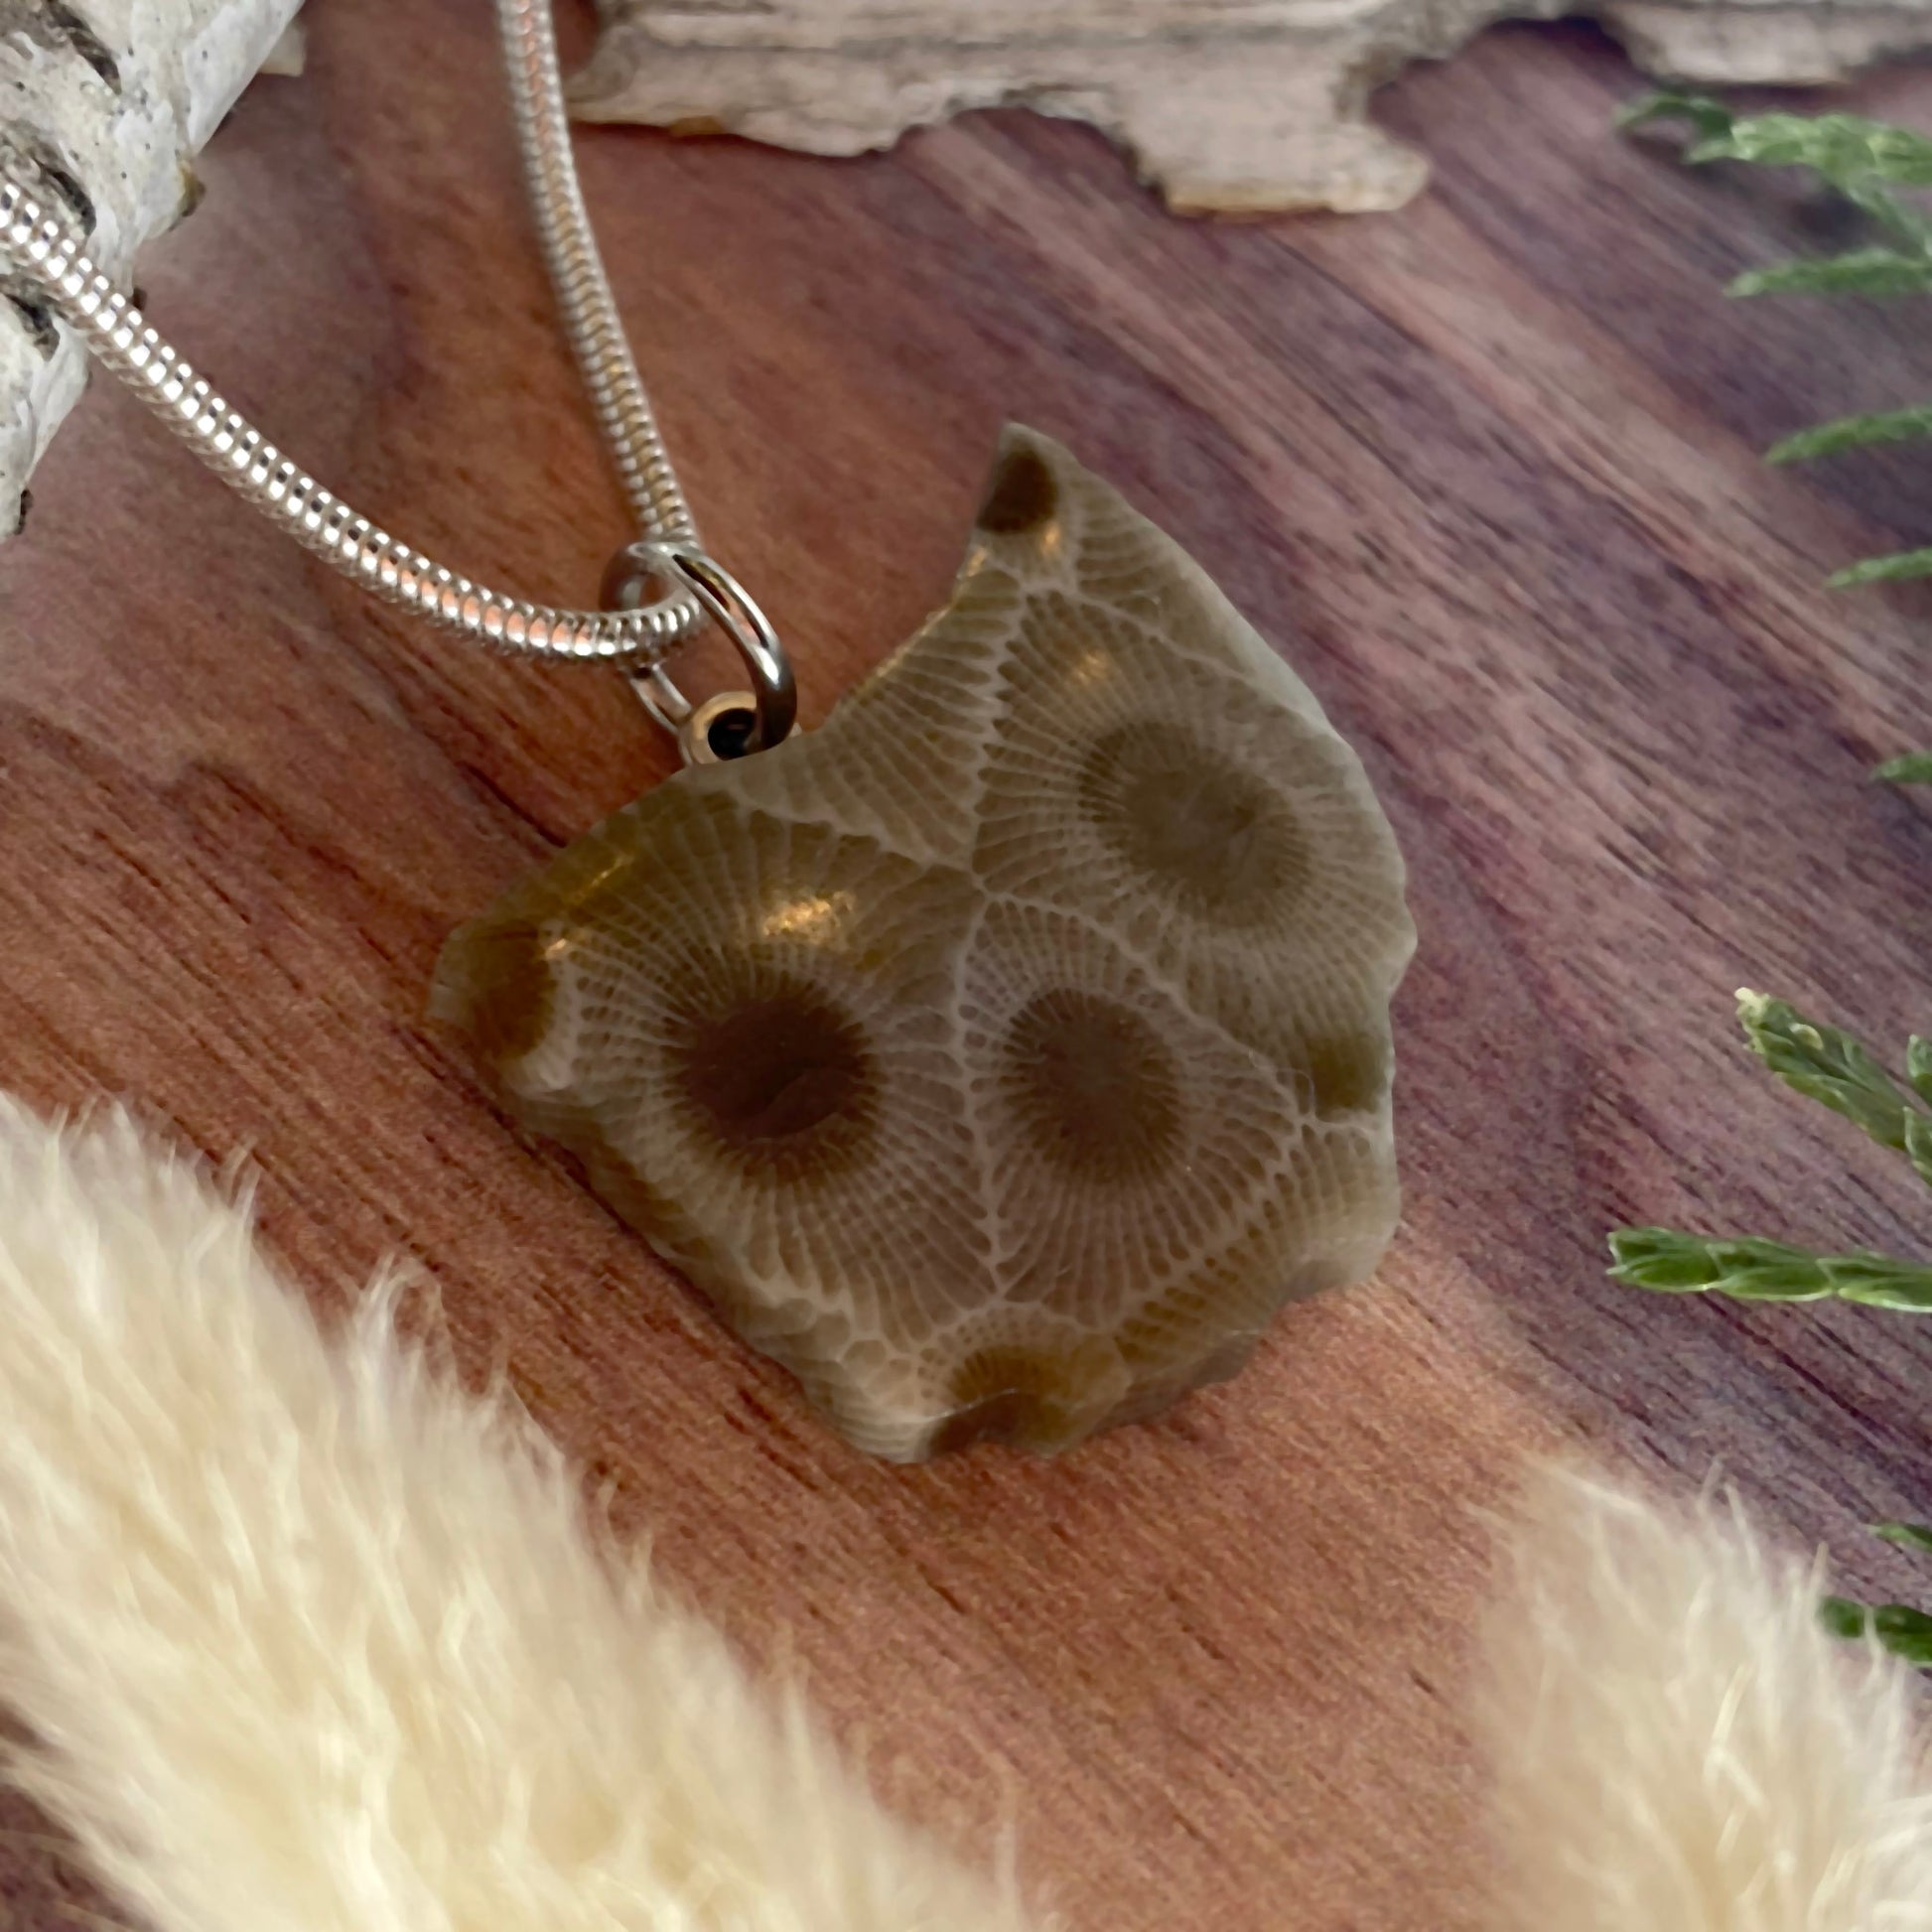 Ohio Petoskey Stone Pendant Necklace Front View II - Stone Treasures by the Lake